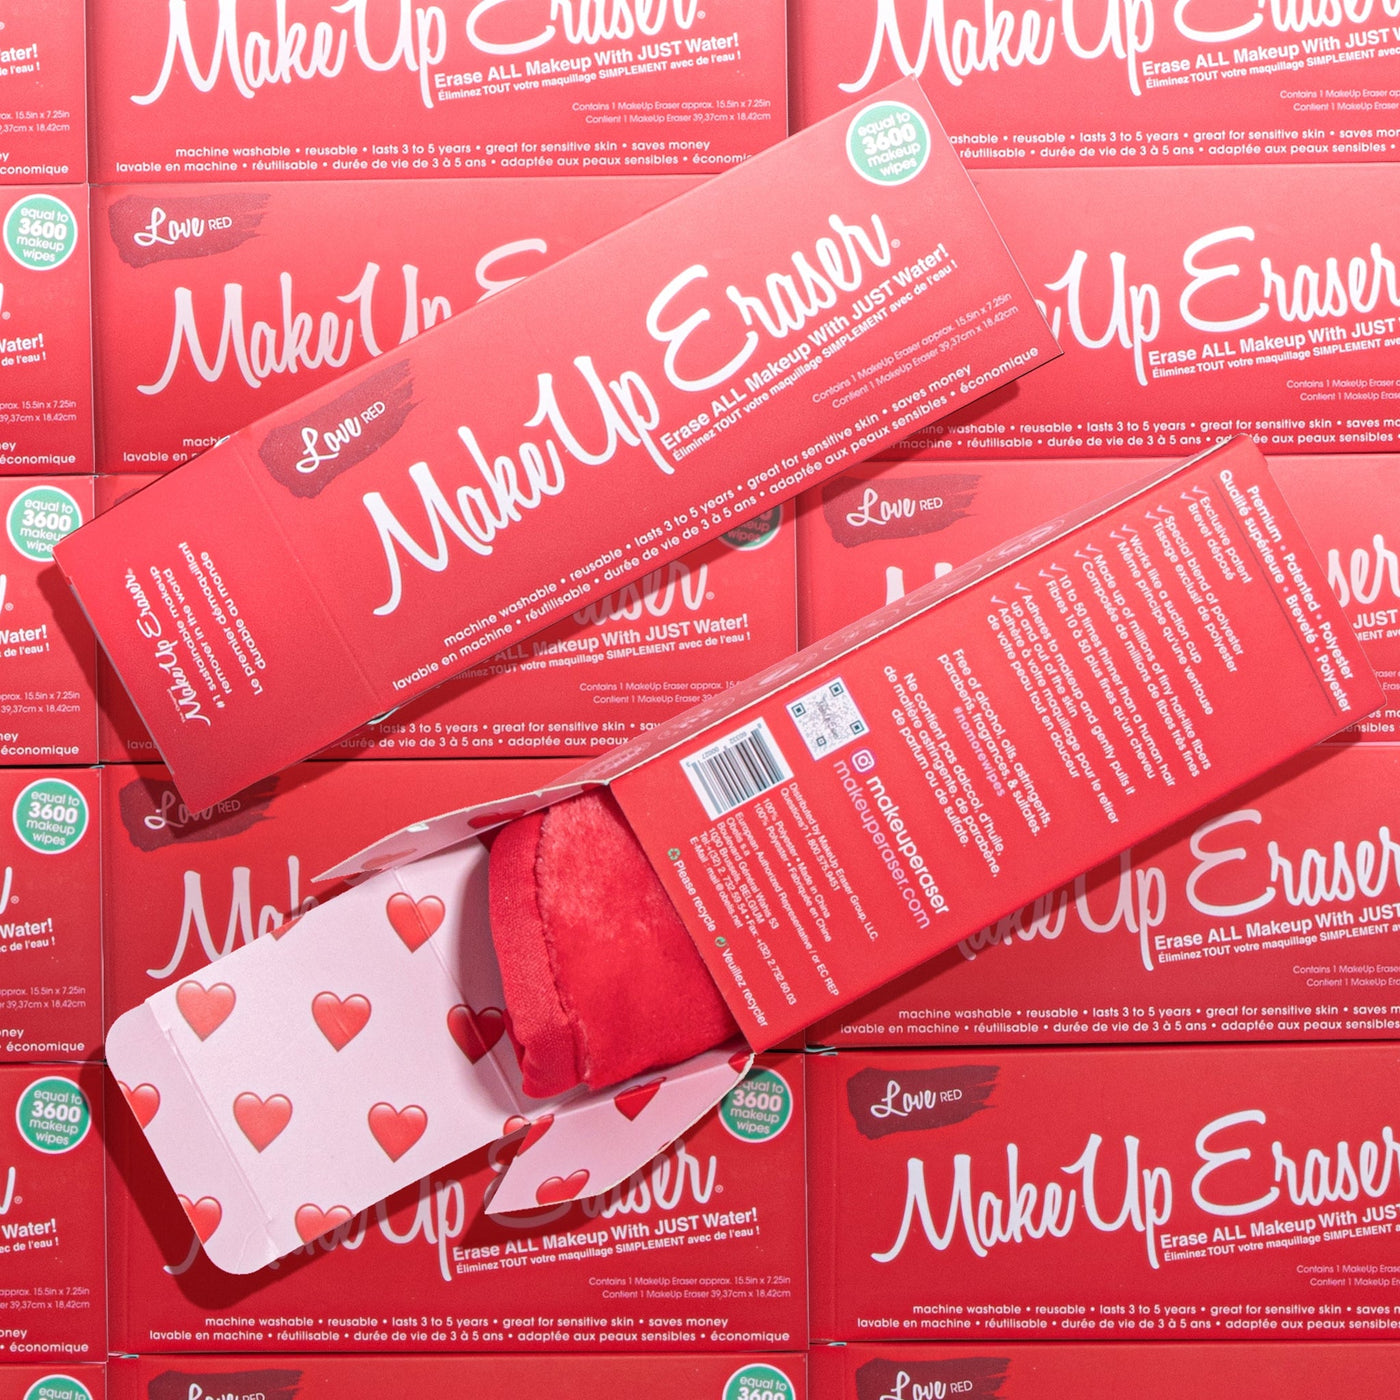 THE ORIGINAL MAKEUP ERASER (Love Red) - Youngblood Mineral Cosmetics